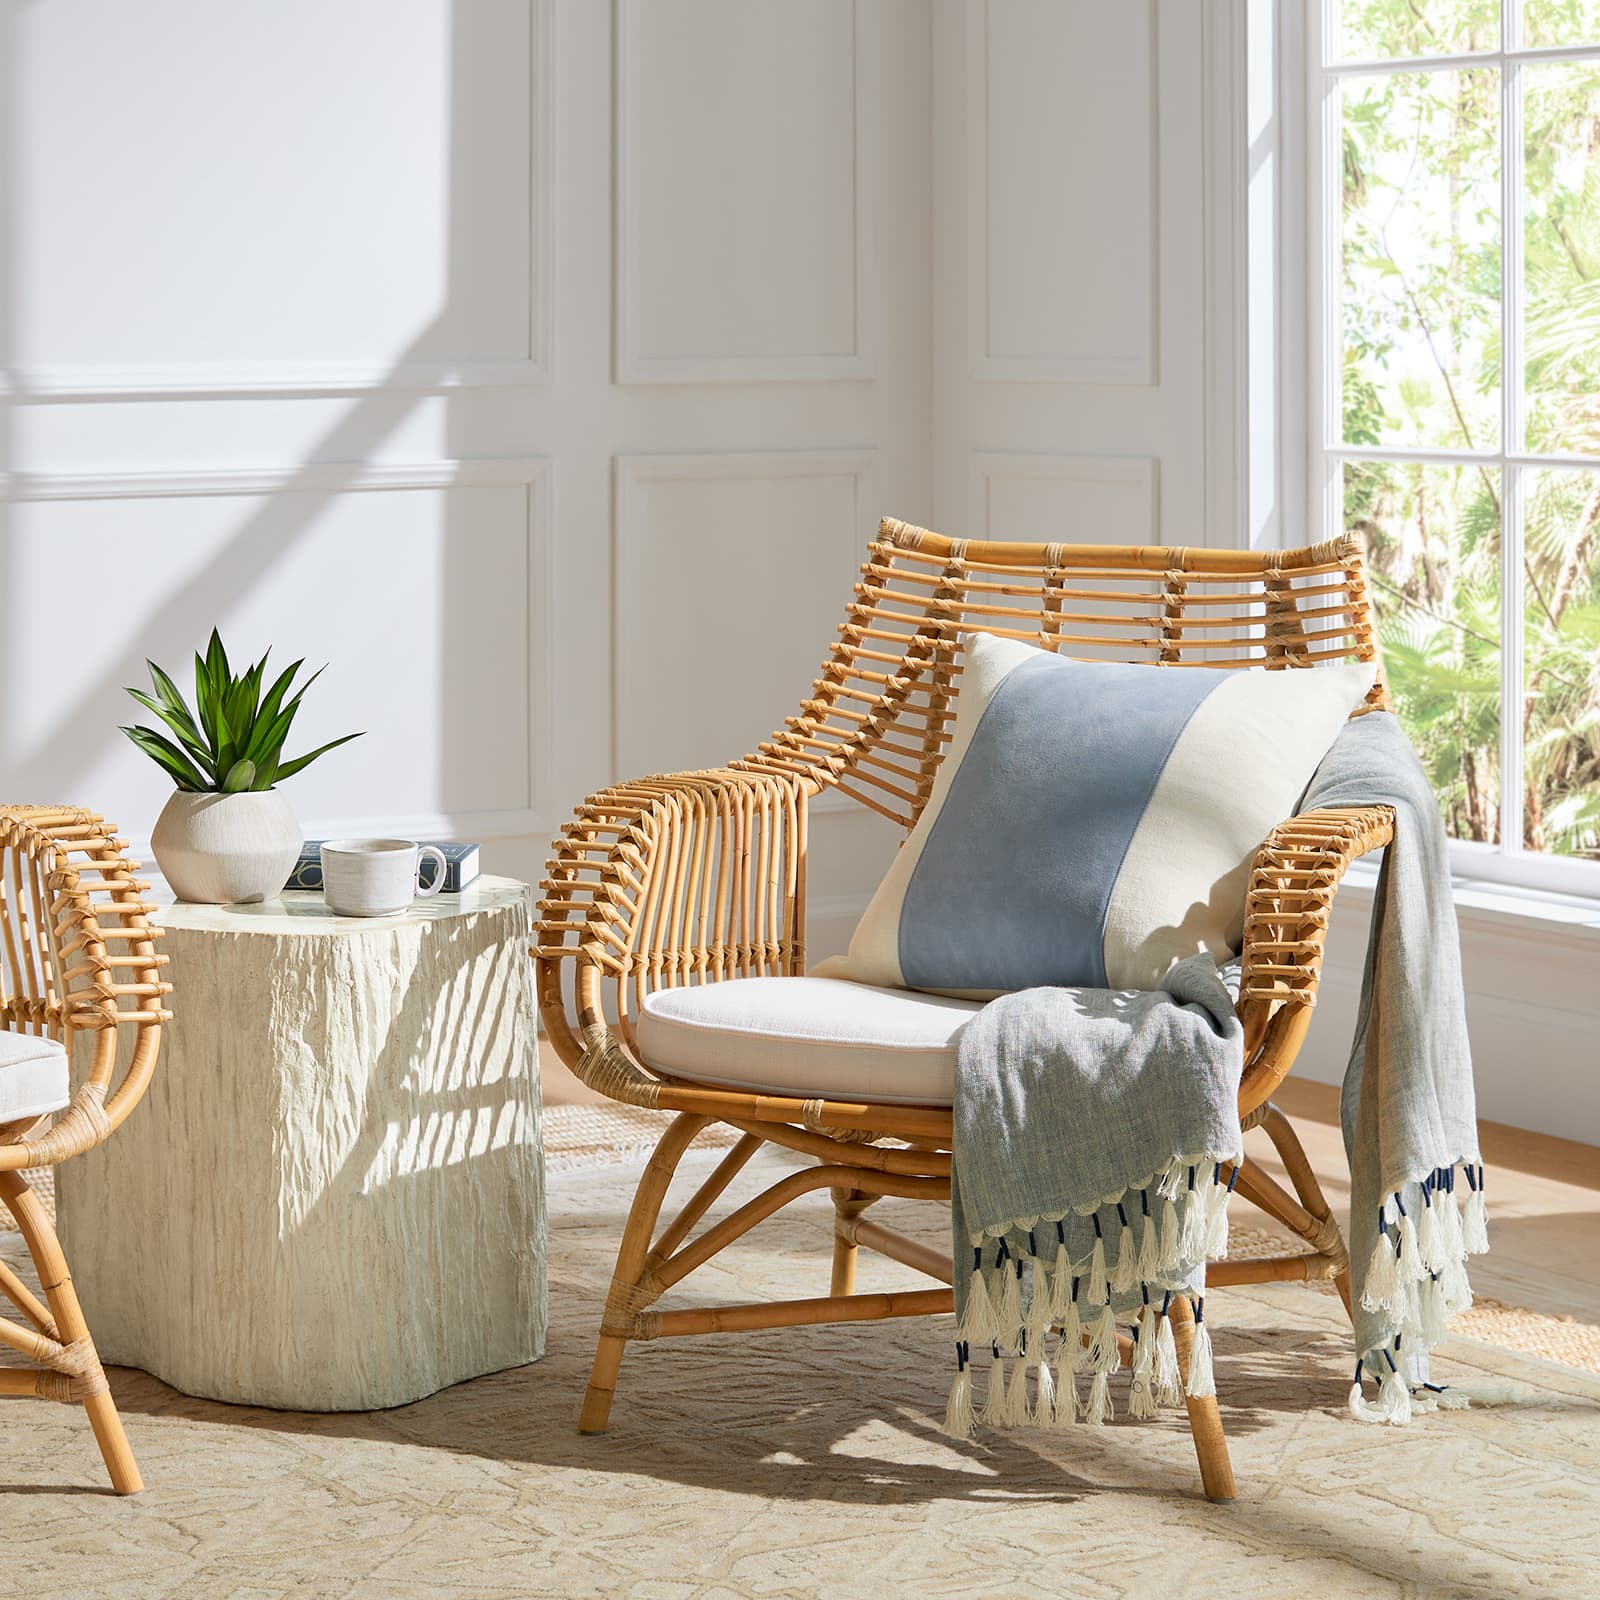 Beach Style Living Room with Wicker Pod Chairs - Cottage - Living Room